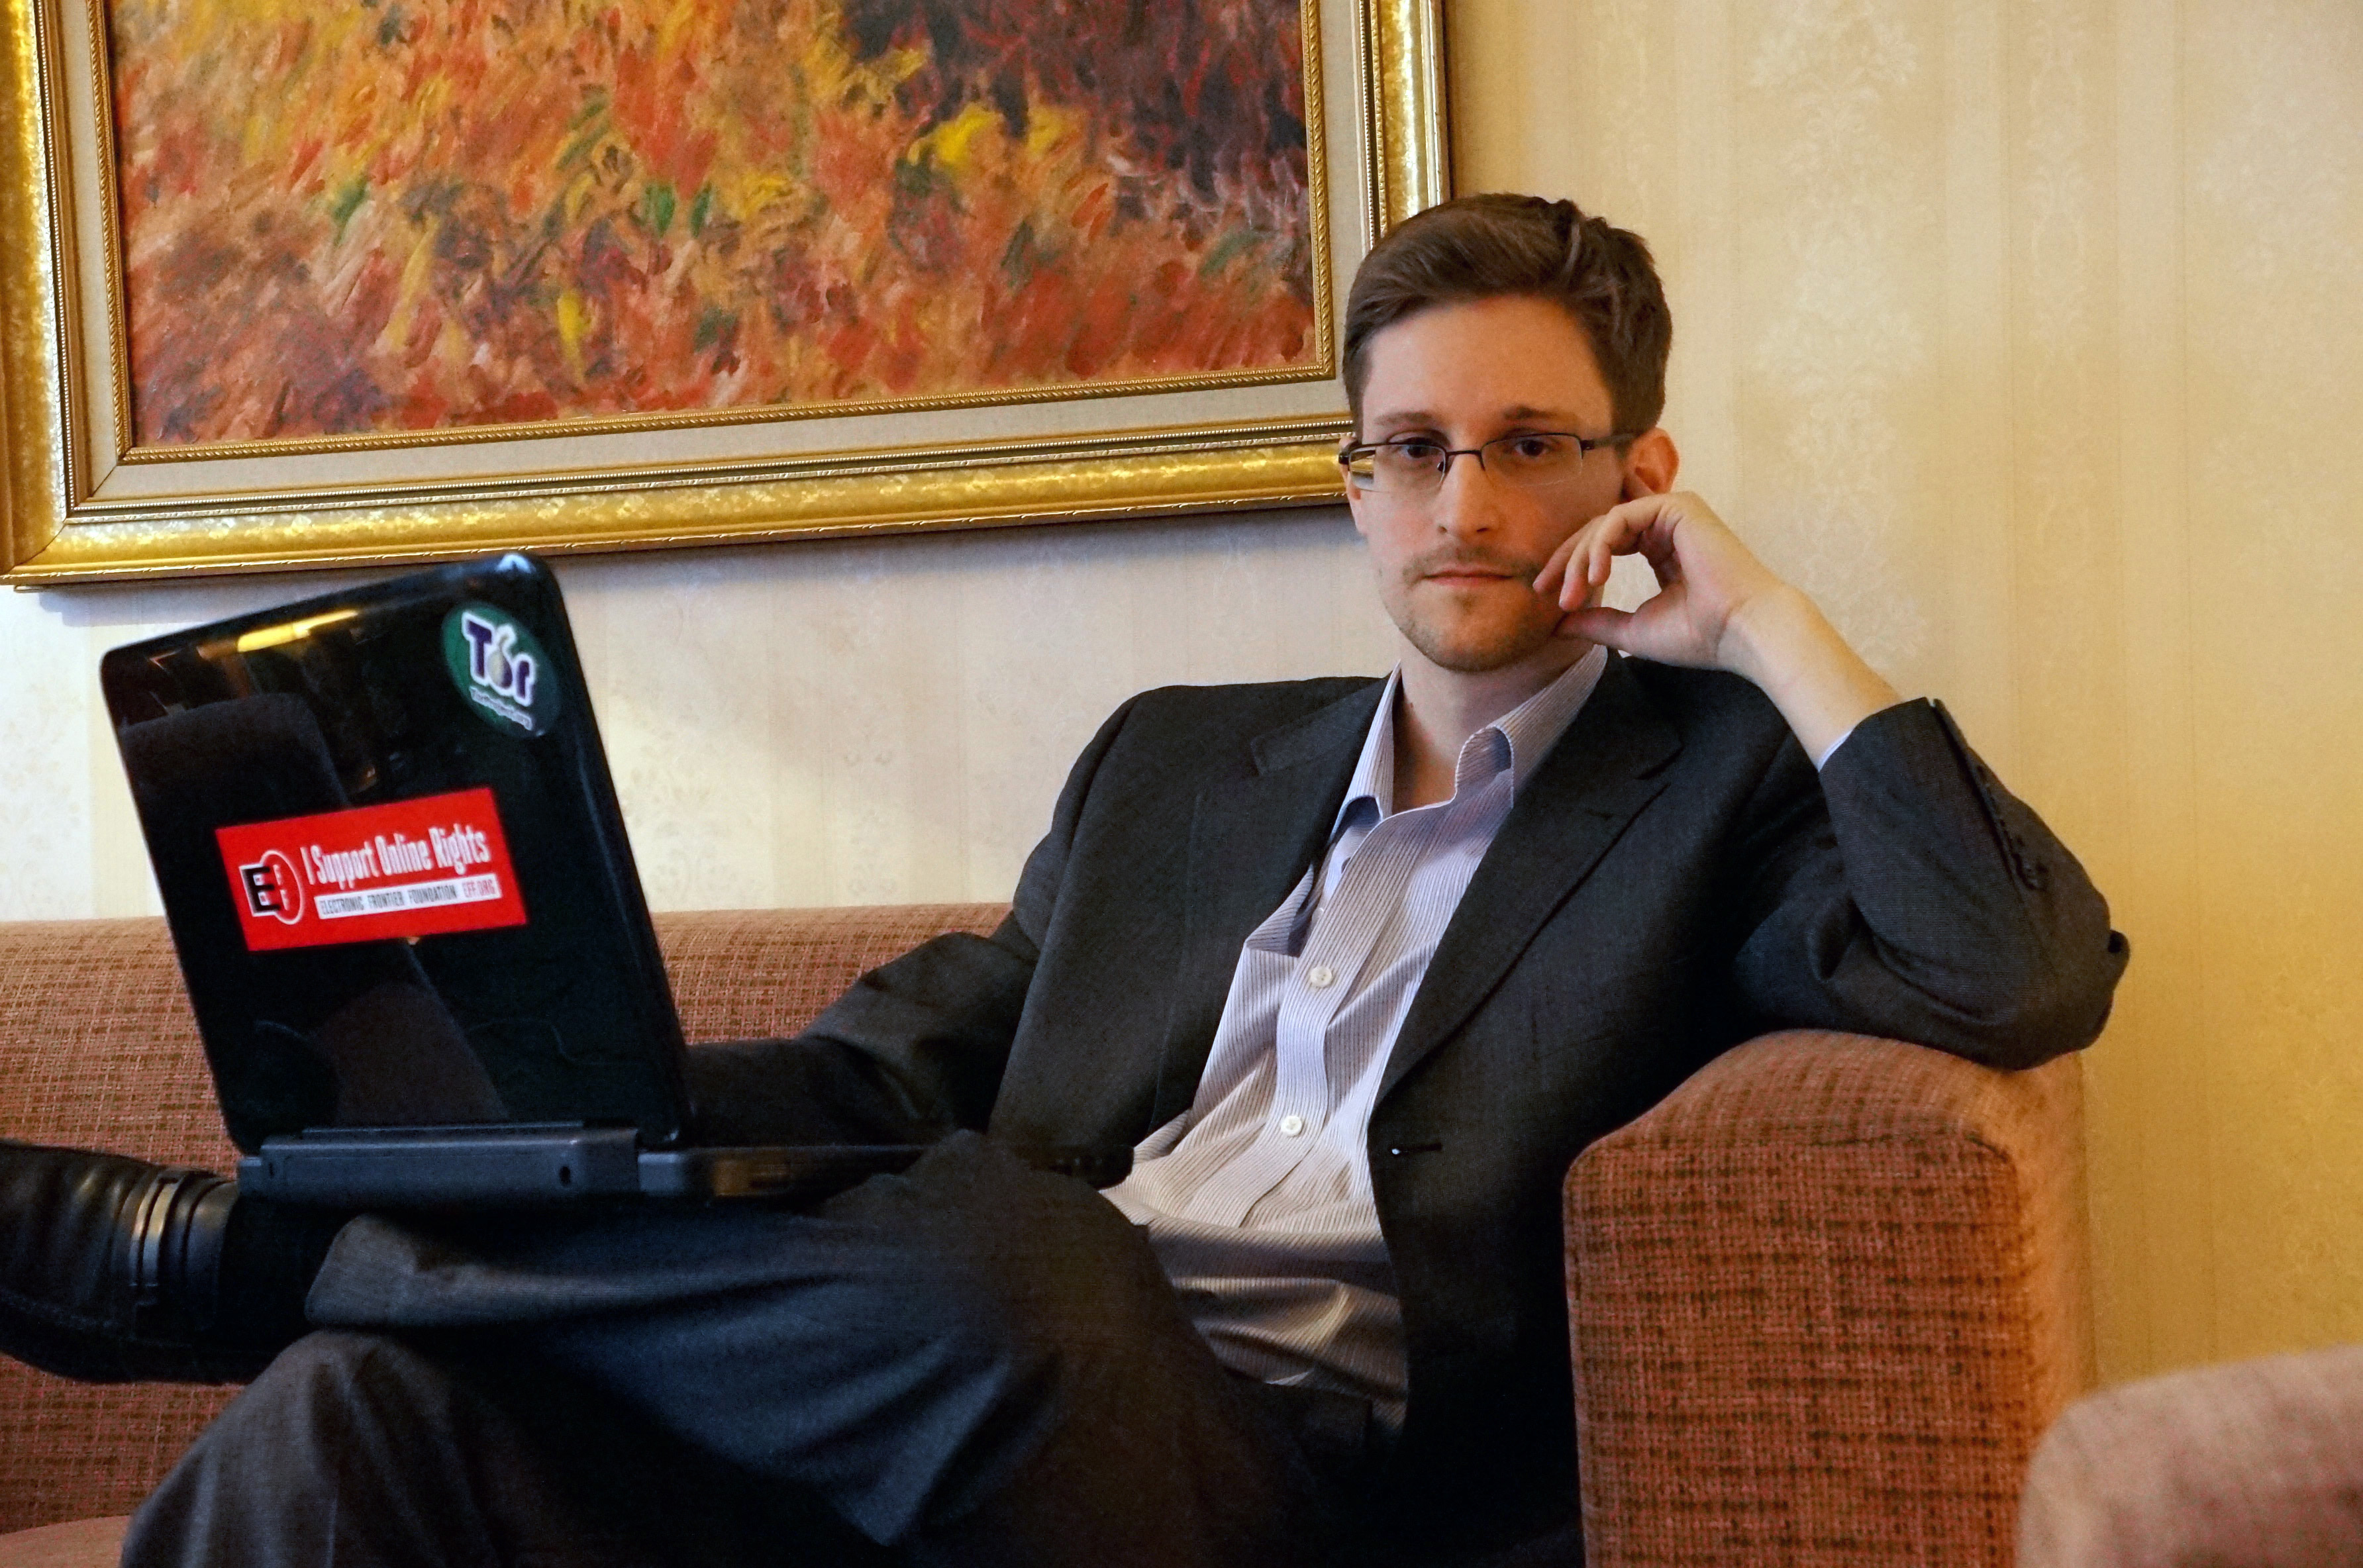 Former intelligence contractor Edward Snowden poses for a photo during an interview in an undisclosed location in December 2013 in Moscow, Russia. (Barton Gellman&mdash;Getty Images)